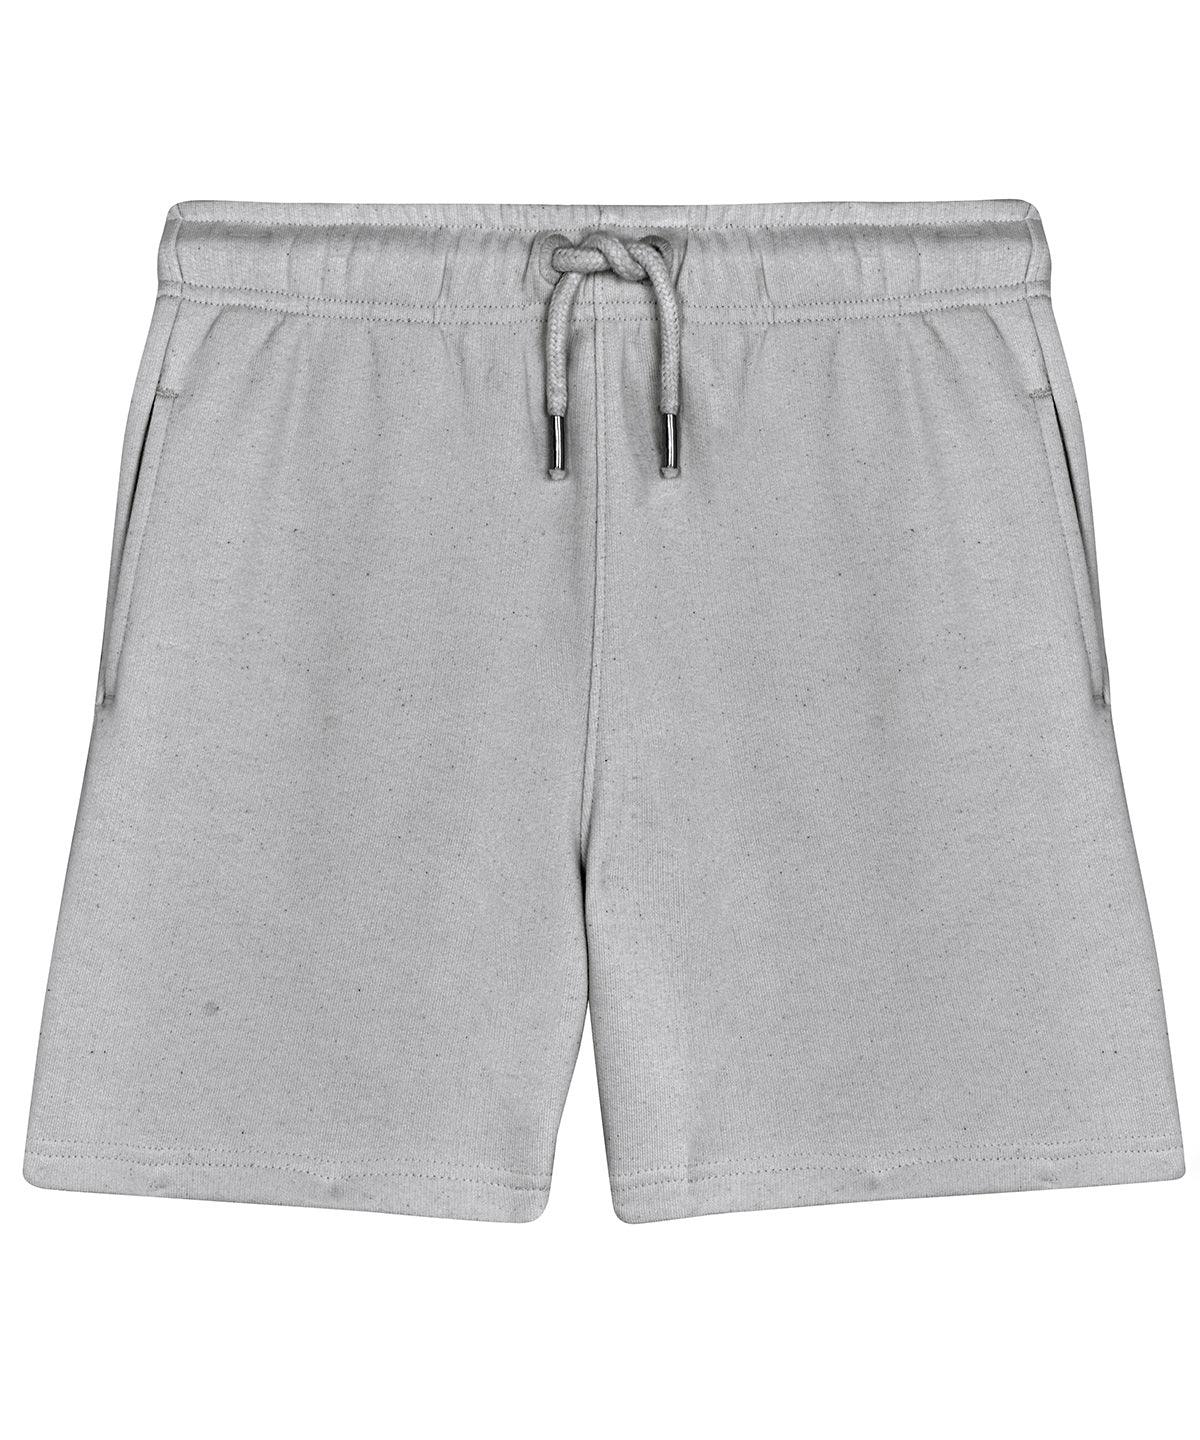 Heather Grey - Mini Bolter kids shorts (STBK102) Shorts Stanley/Stella New Styles for 2023, Organic & Conscious, Rebrandable, Trousers & Shorts Schoolwear Centres